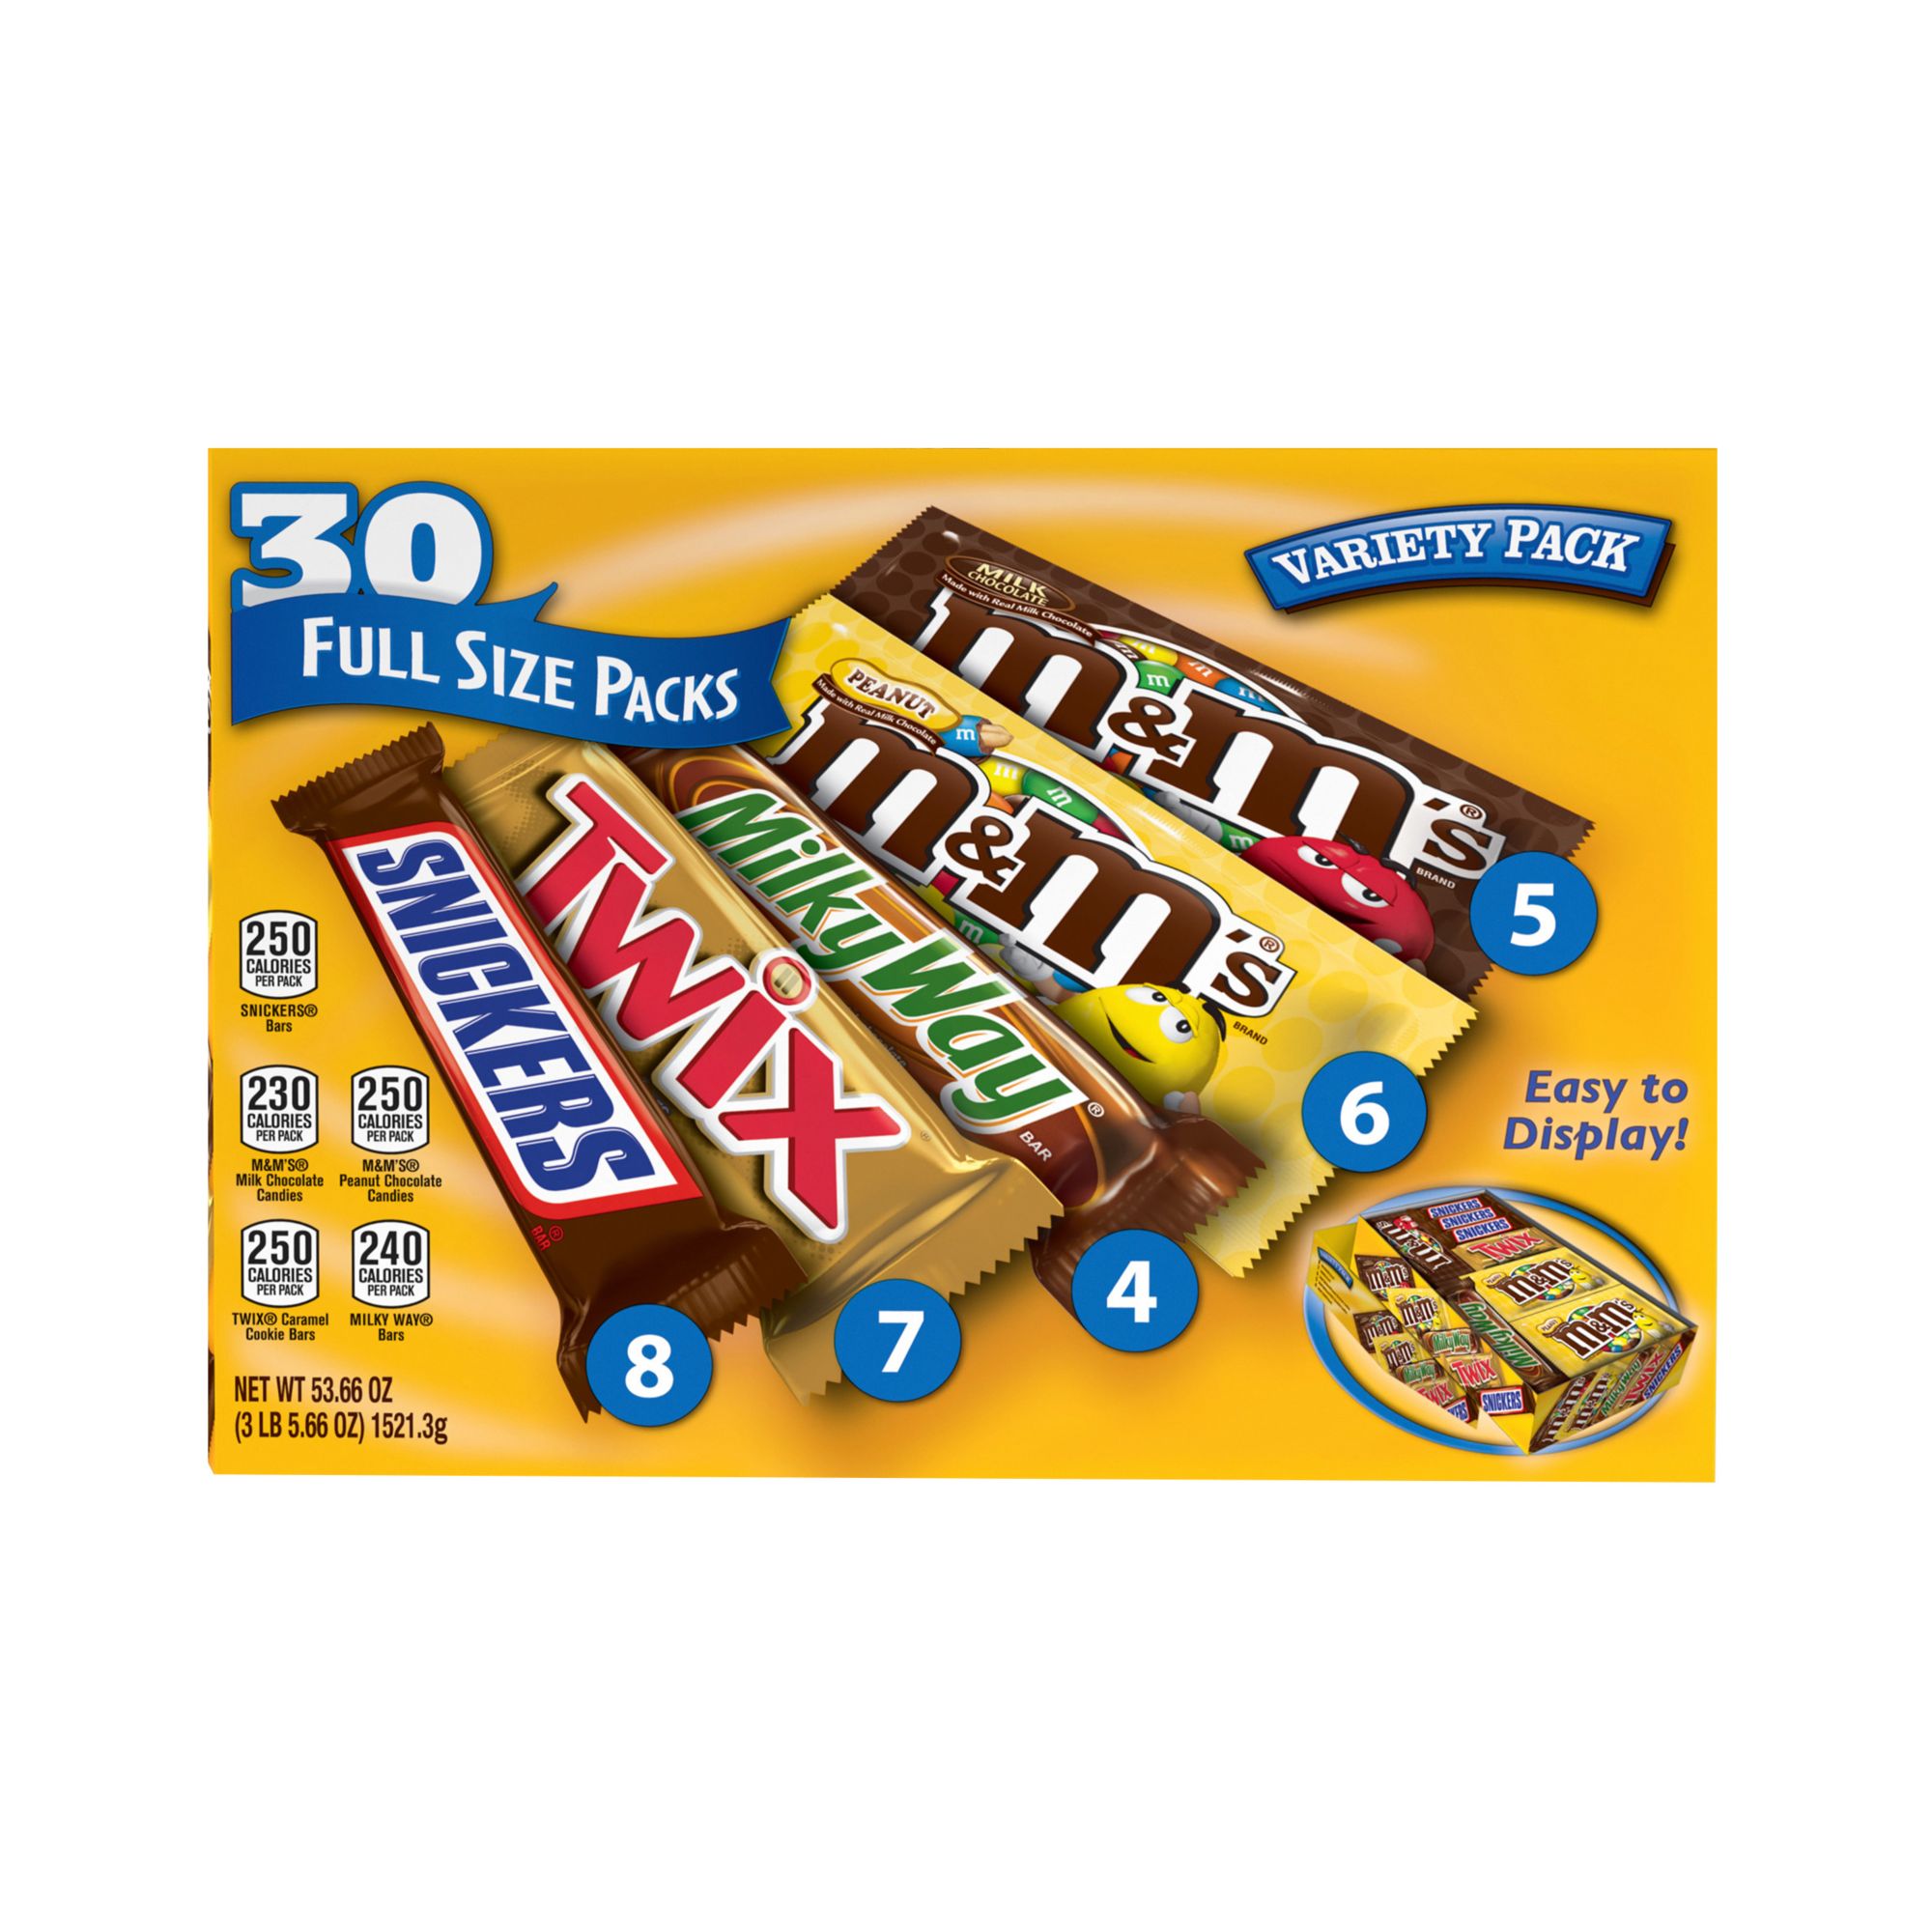 M&M's, Twix, Snickers & Milky Way Full Size Candy Bars Assorted Variety Box, 30 ct.